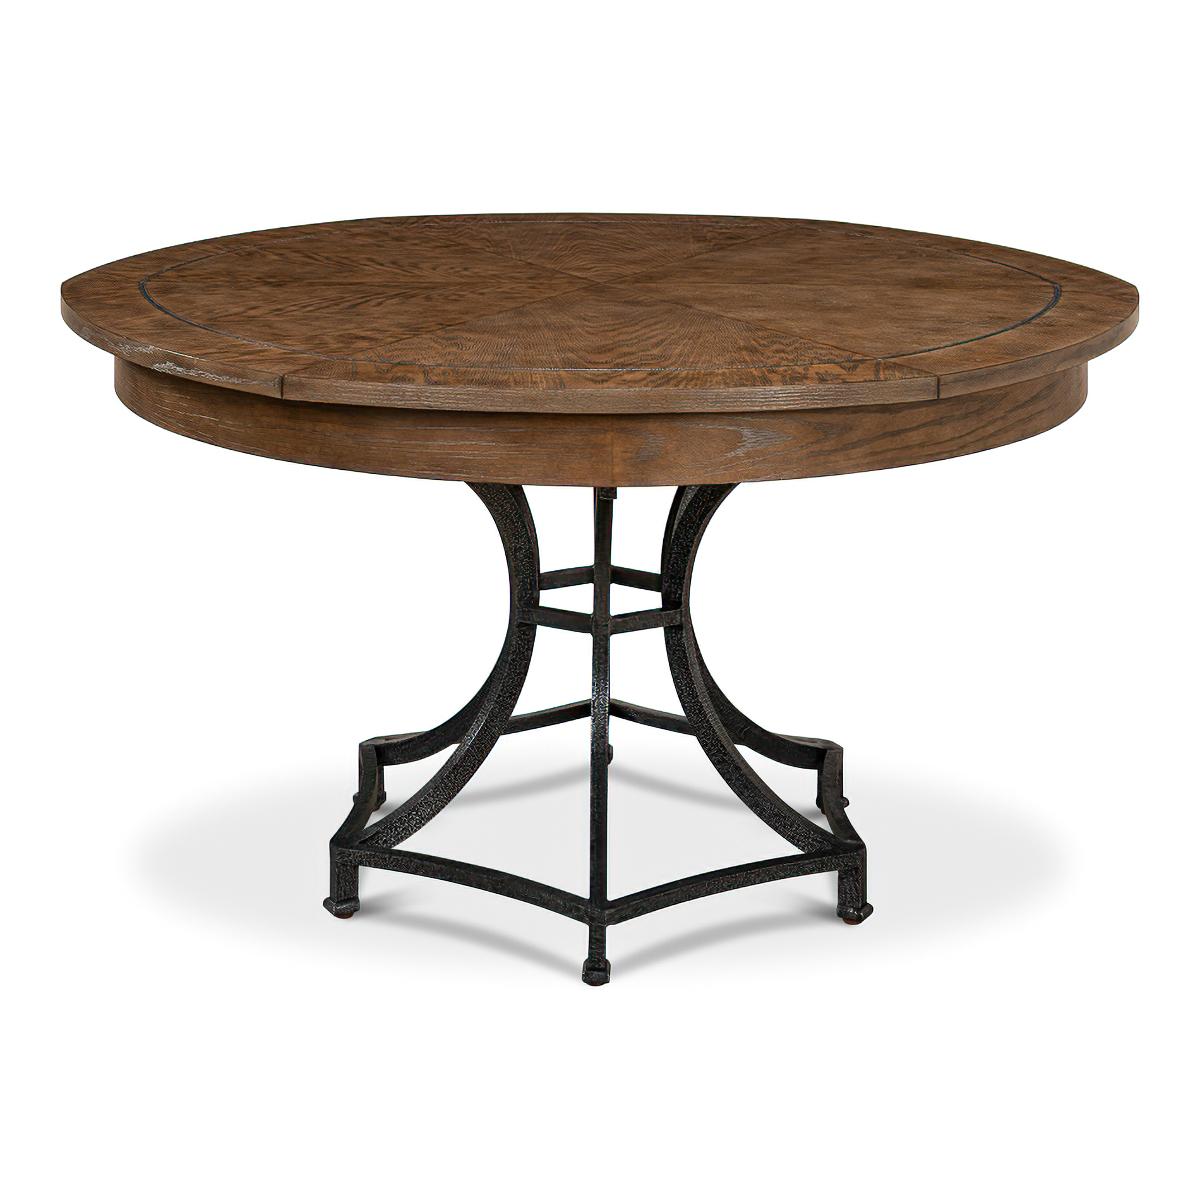 A Modern Industrial style round extending dining table. Featuring a medium oak finish top with dark hammered metal inlays on a metal pedestal column base.

Open dimensions: 70